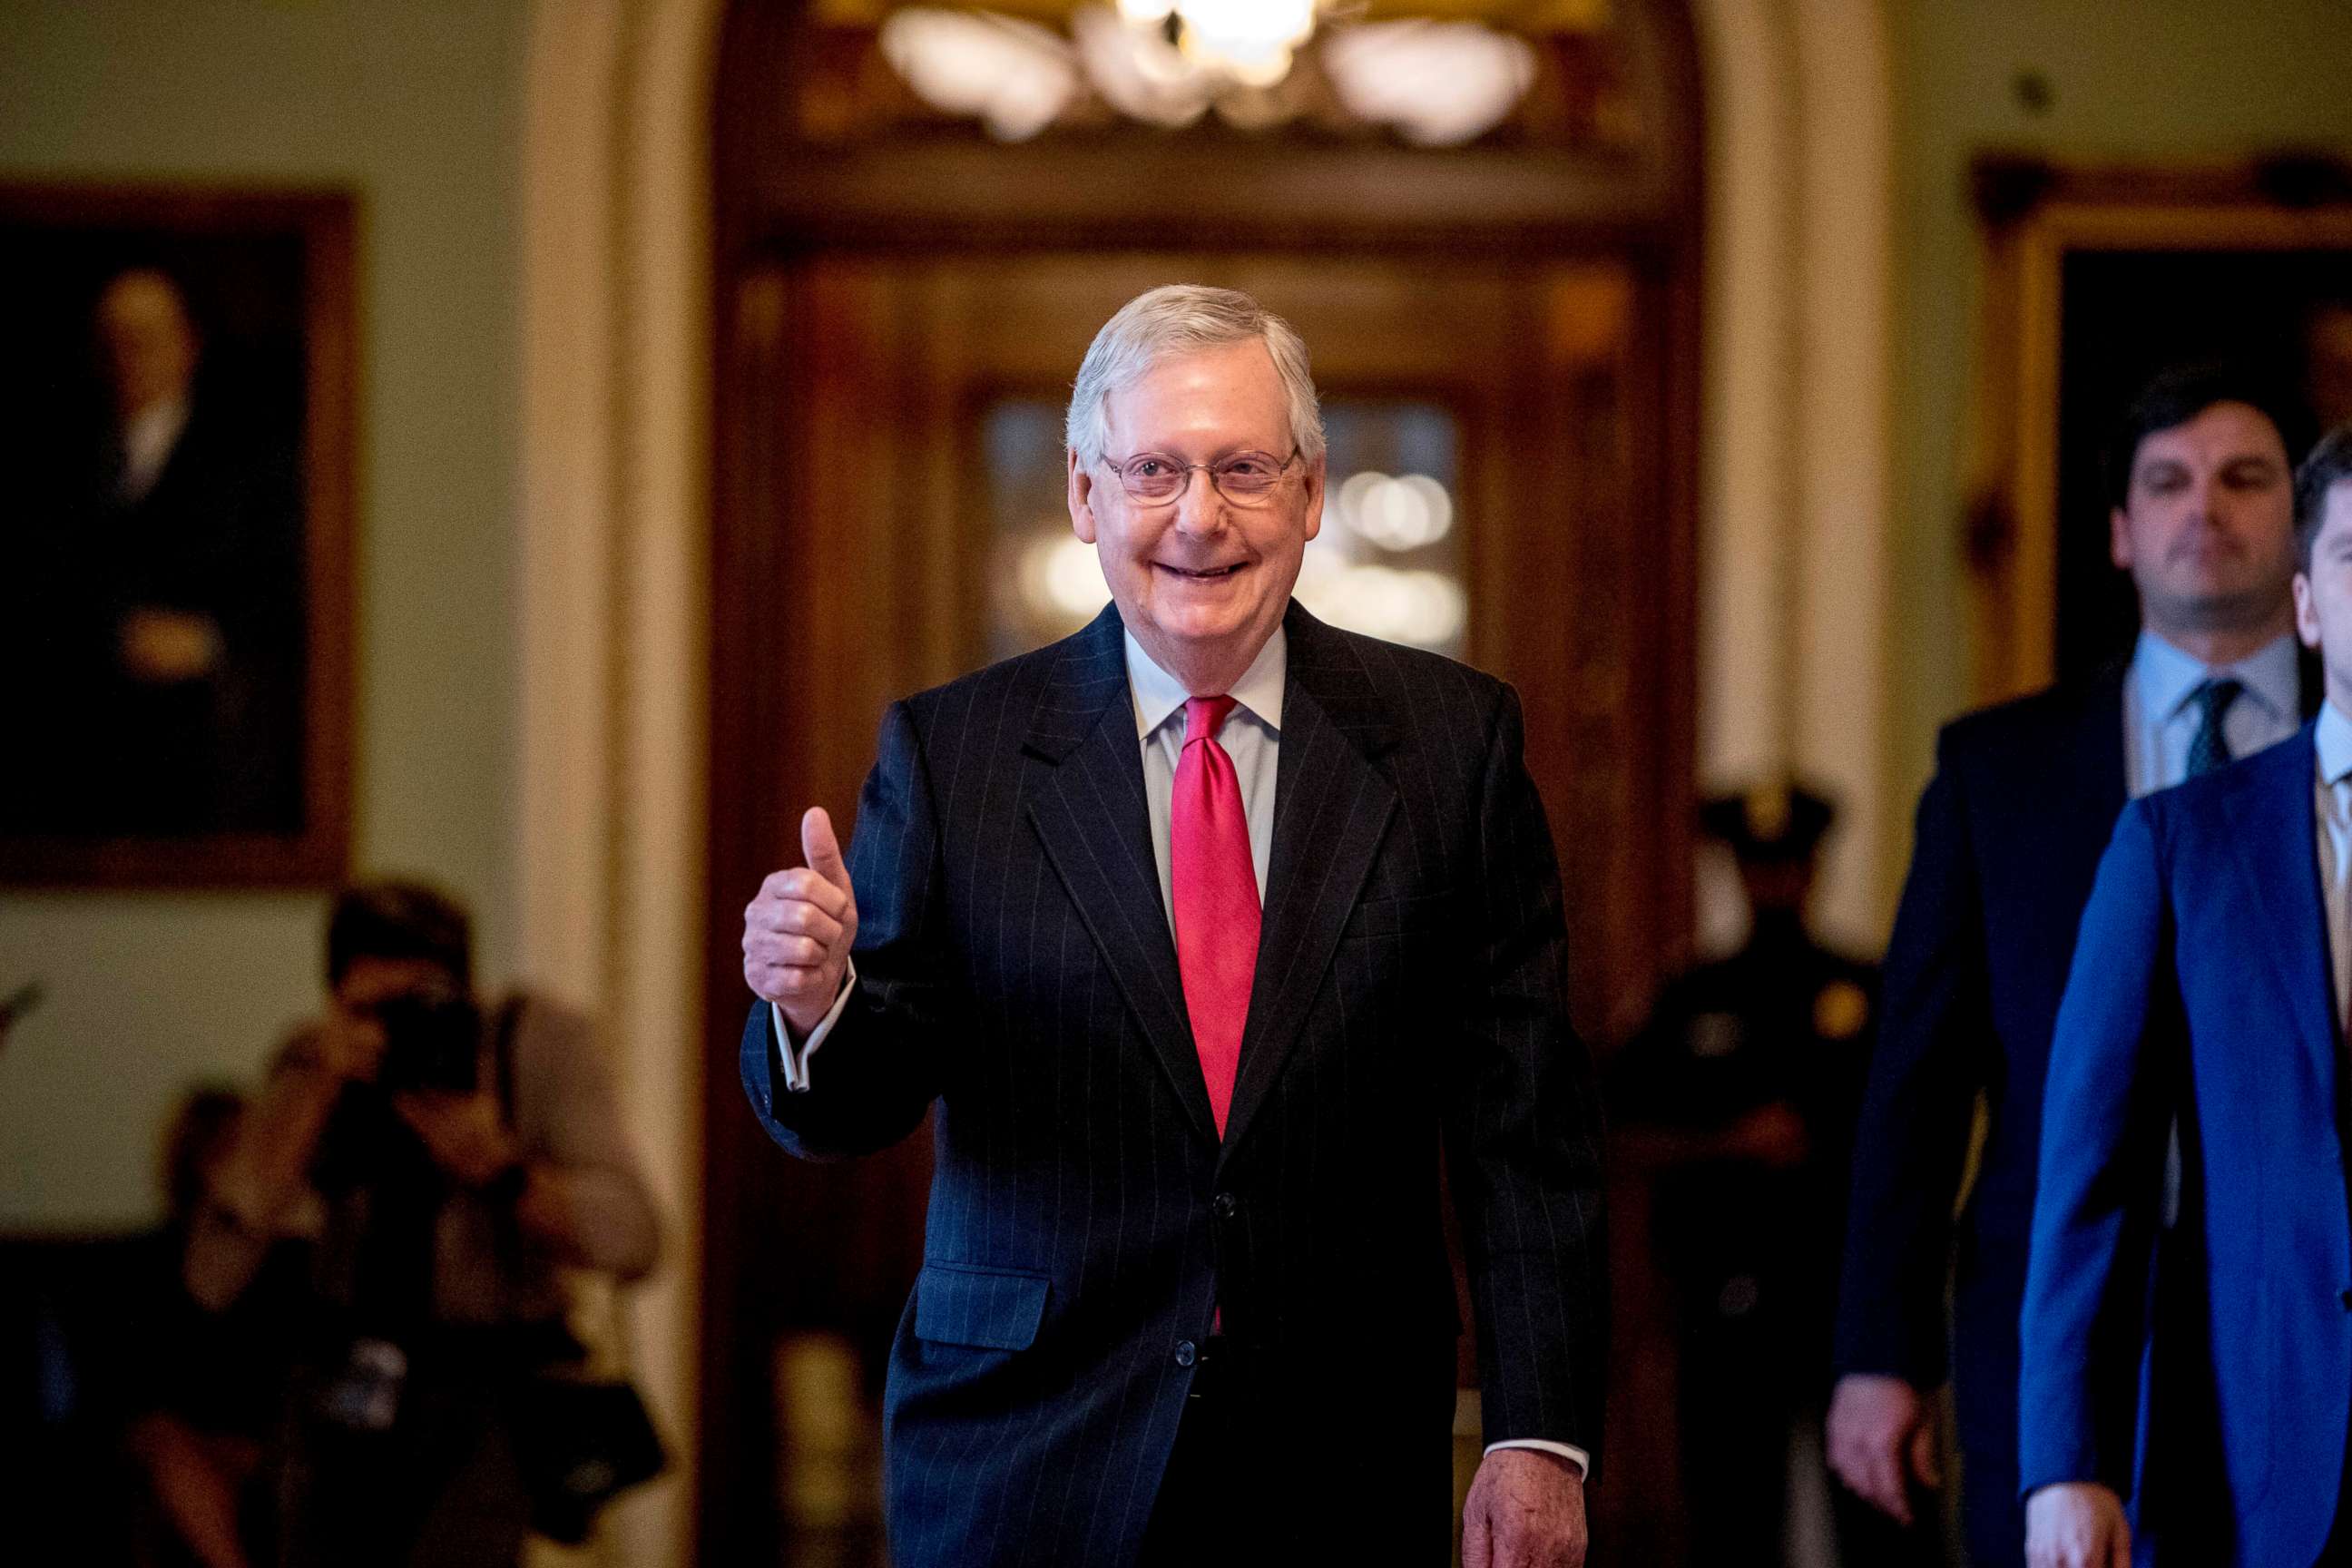 PHOTO: Senate Majority Leader Mitch McConnell gives a thumbs up as he leaves the Senate chamber on Capitol Hill in Washington, March 25, 2020, where a deal has been reached on a coronavirus bill.